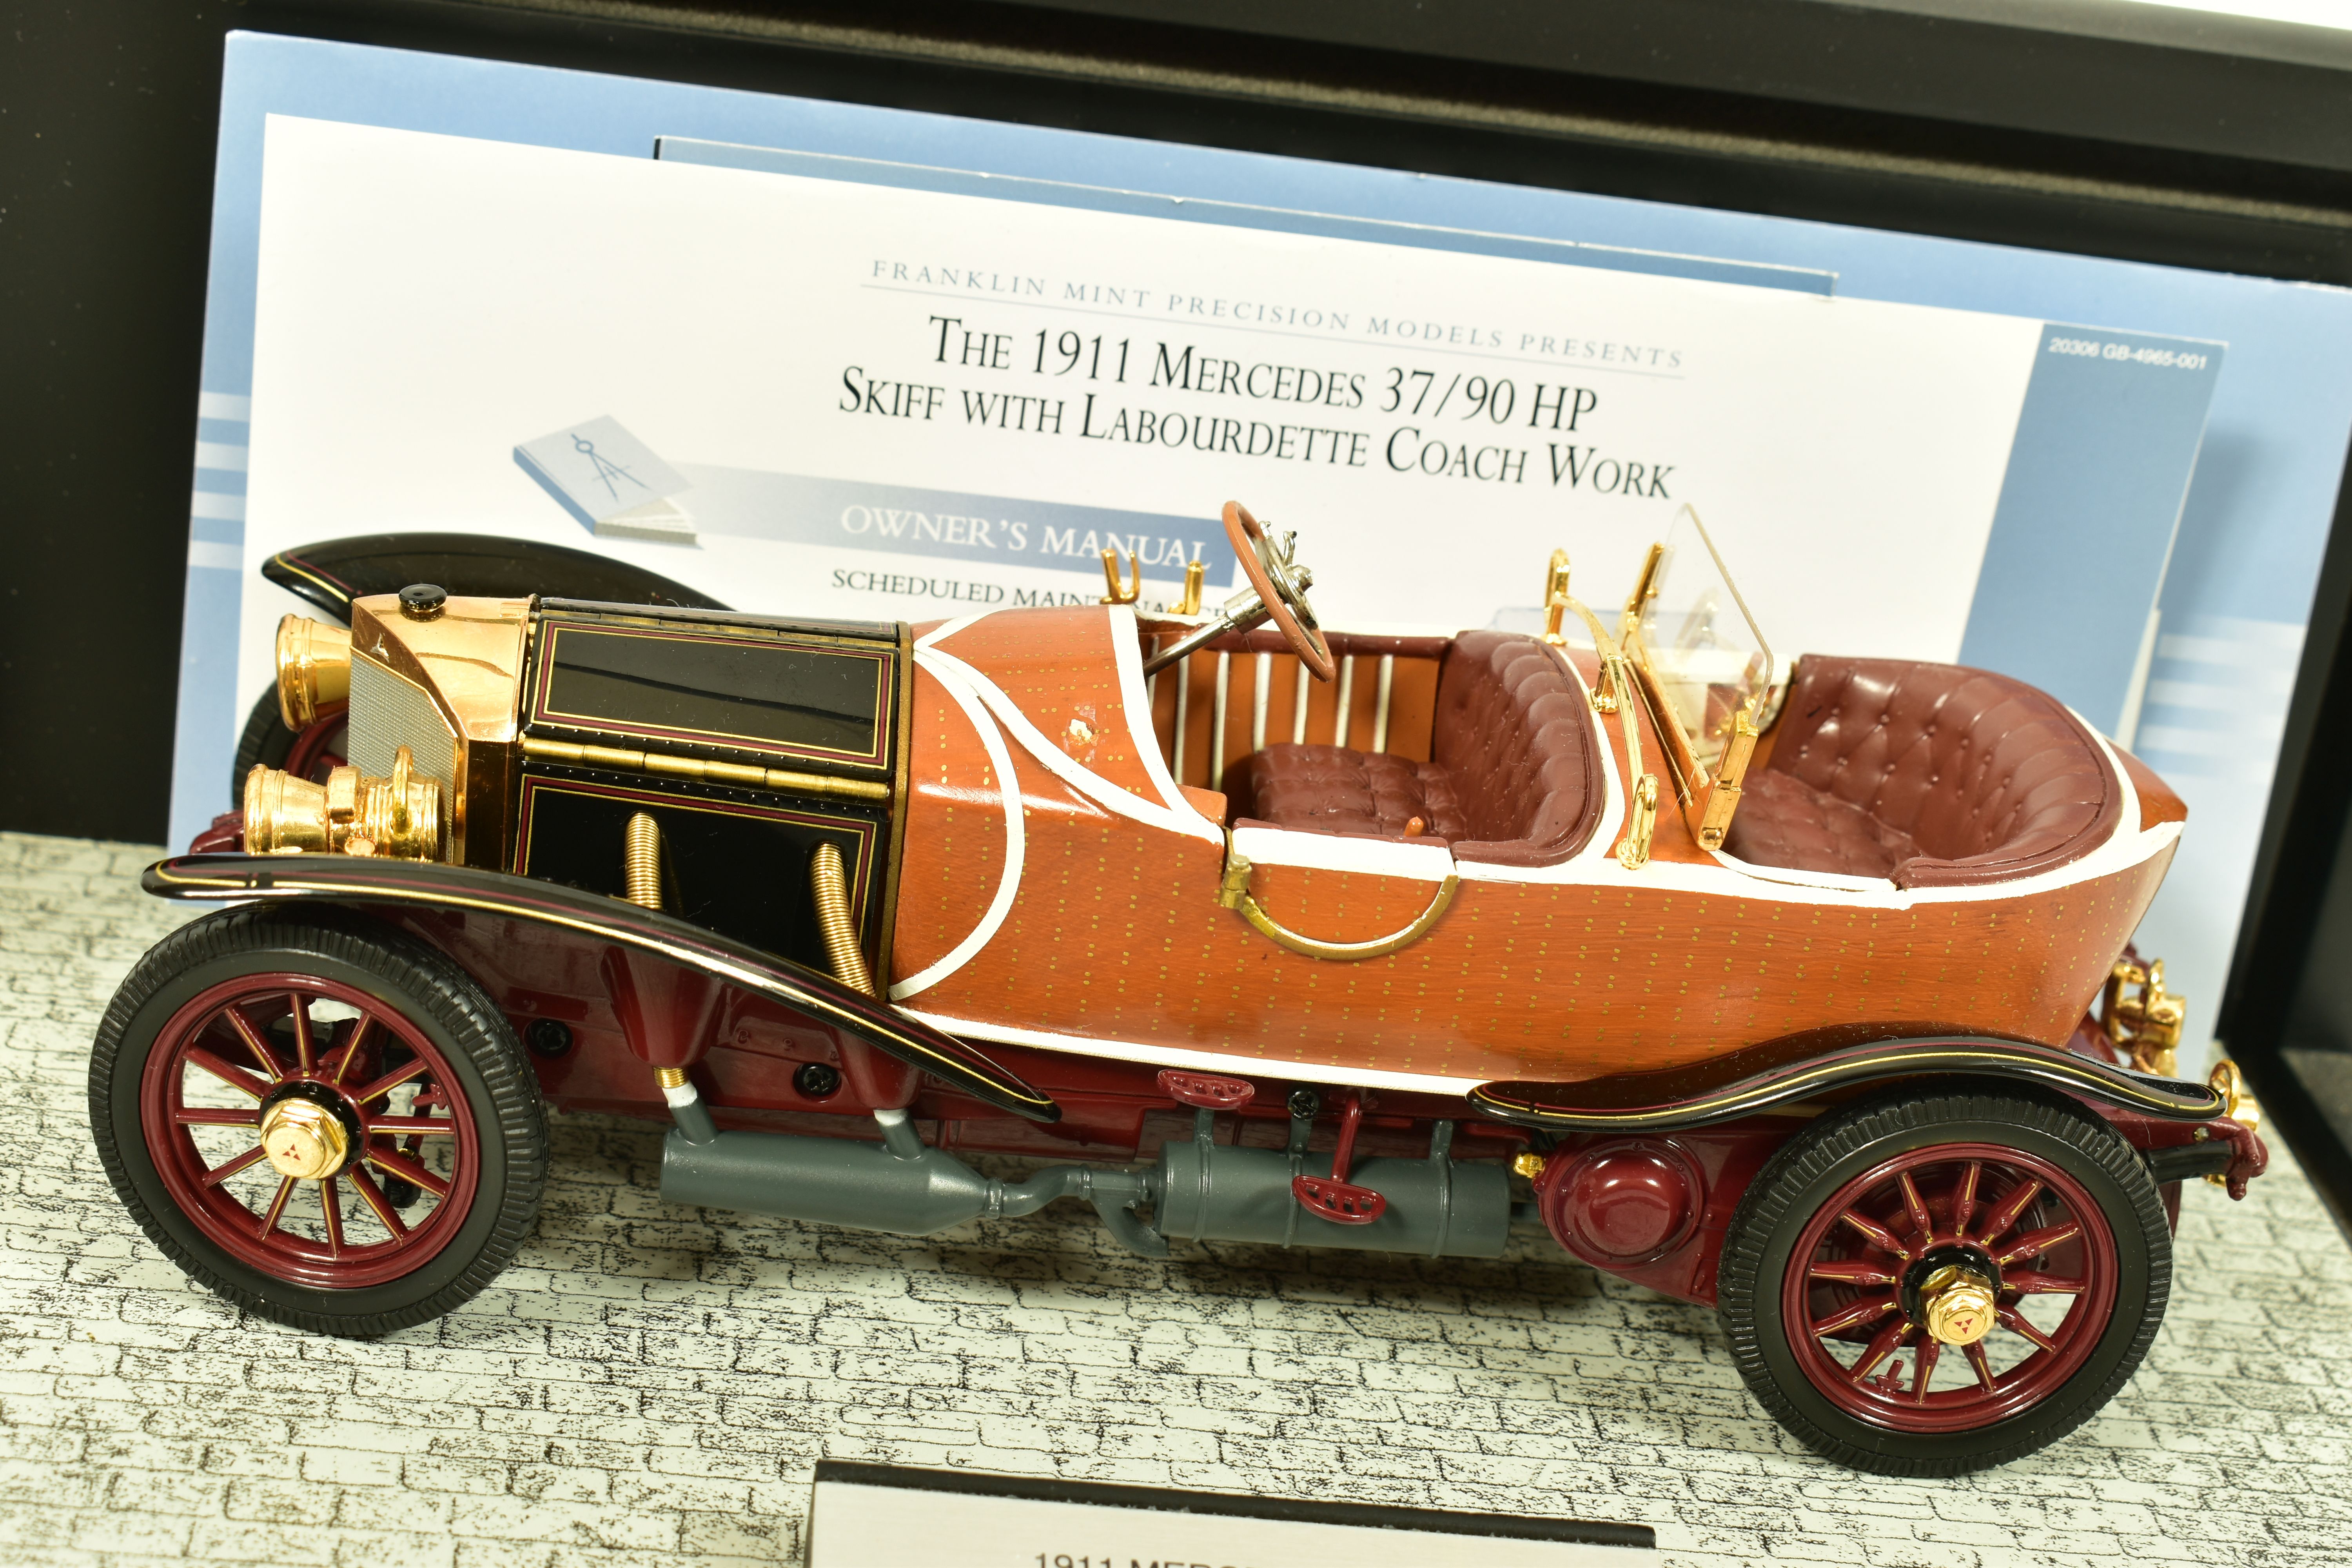 THREE UNBOXED FRANKLIN MINT DIECAST MODELS, 1/24 scale, 1907 Rolls-Royce Silver Ghost, with swing - Image 2 of 11